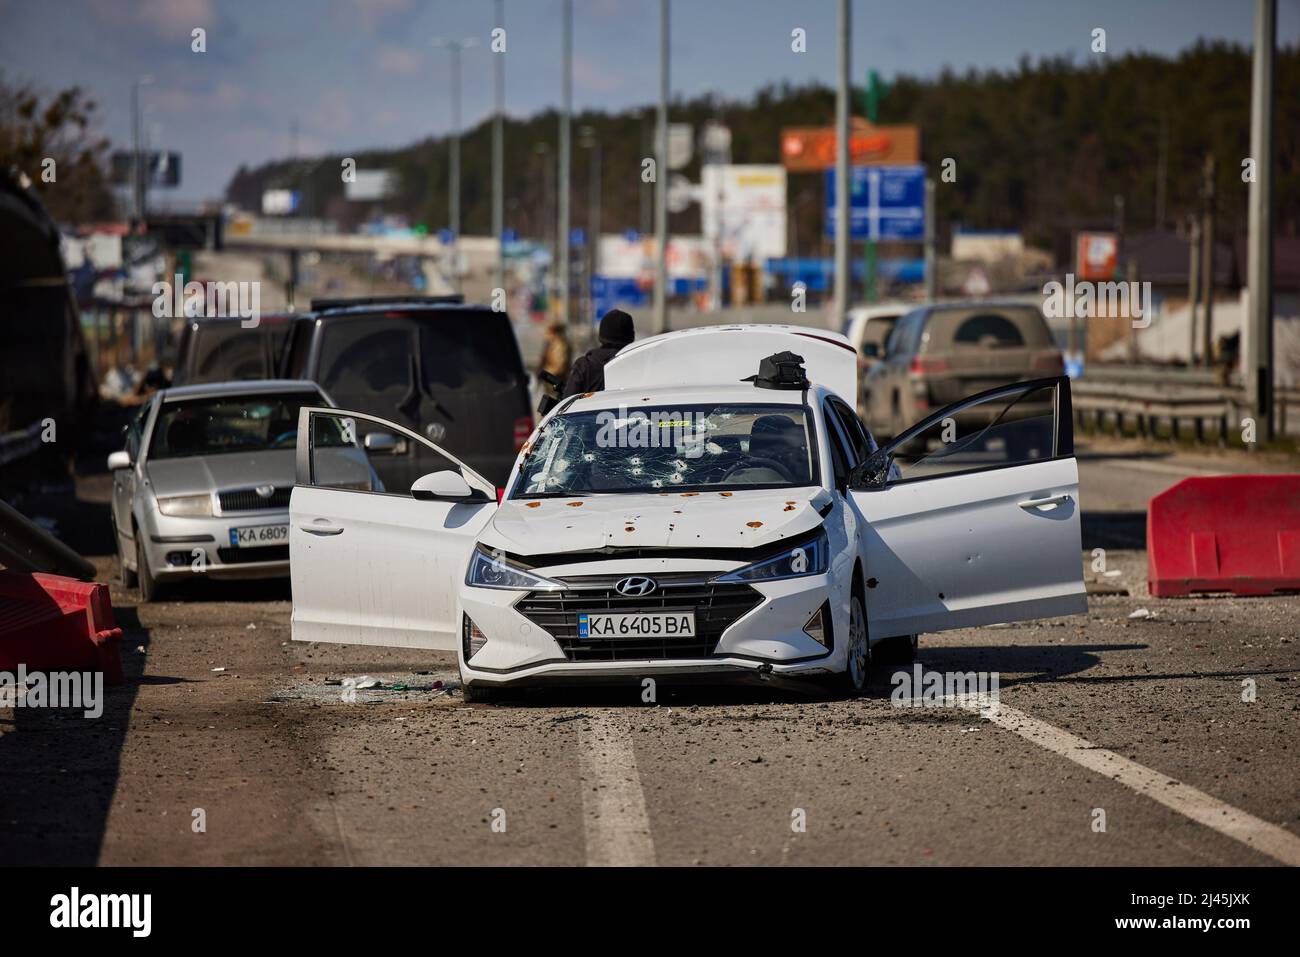 BUCHA, UKRAINE - 04 April 2022 - A car damaged by gunfire on the highway near Bucha, Ukraine. It is not clear from the caption supplied who the occupa Stock Photo